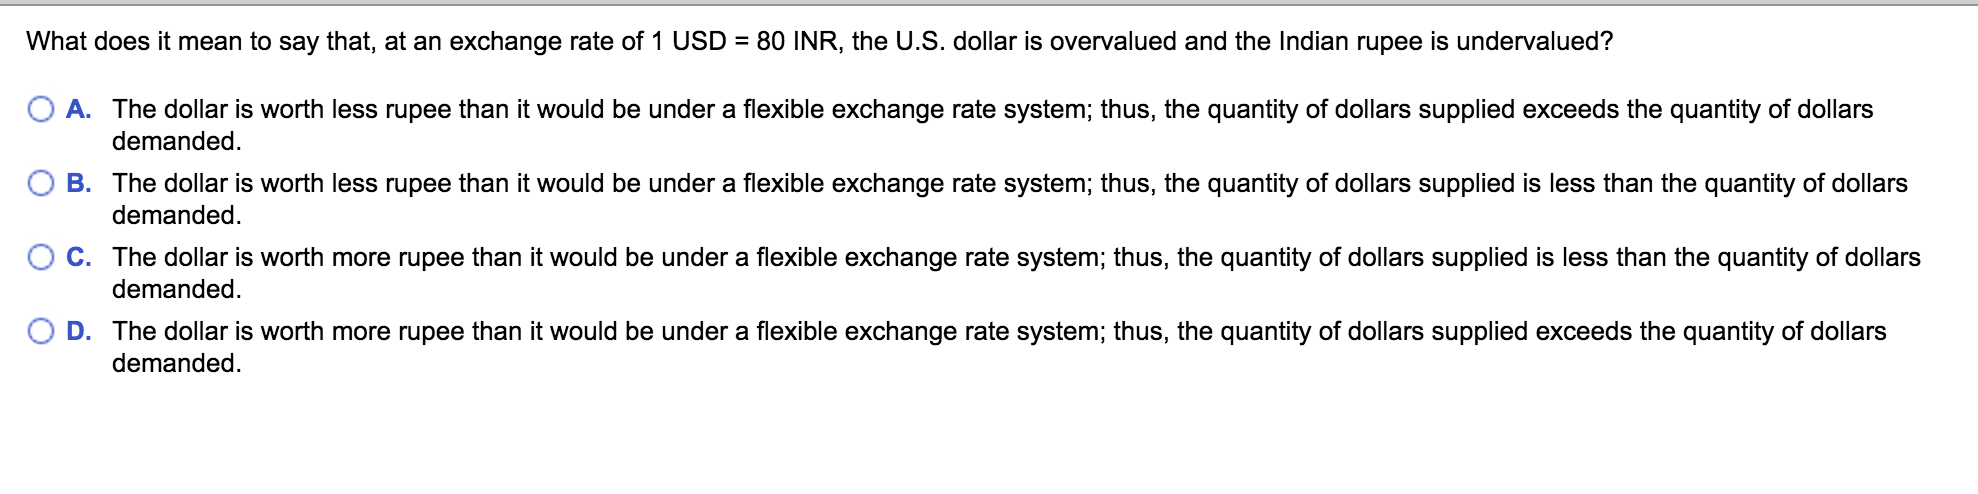 what does currency conversion mean